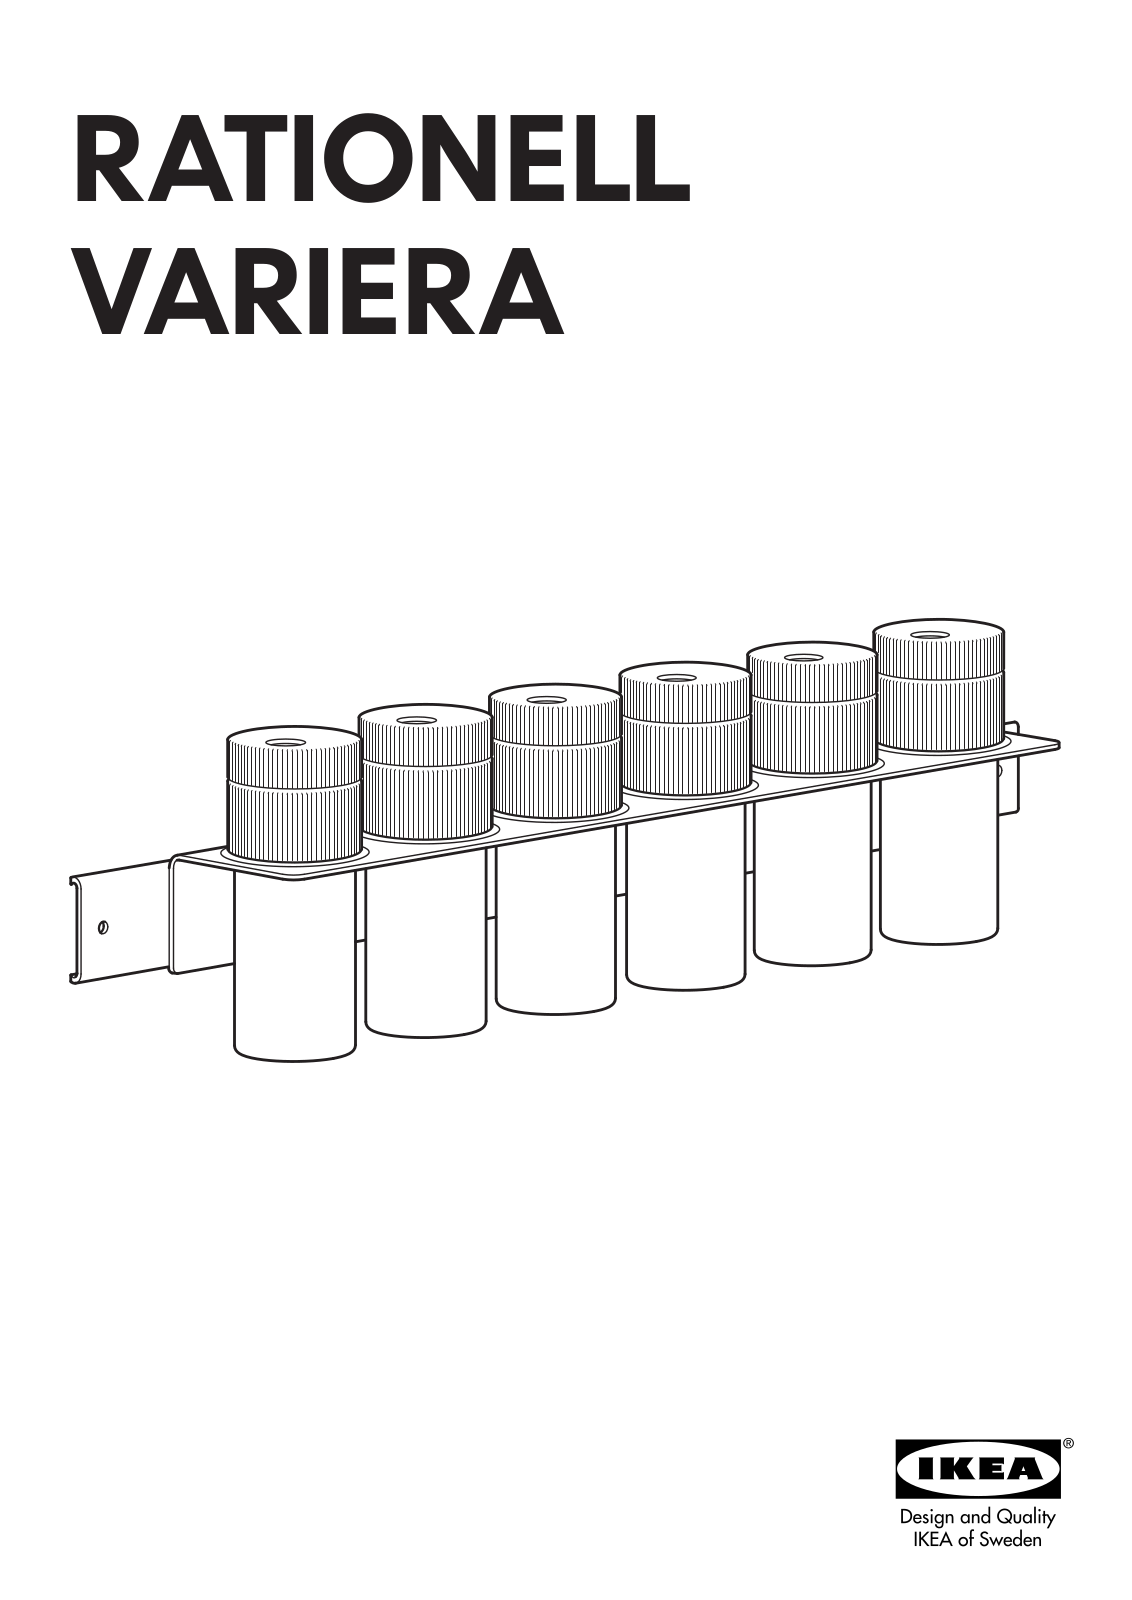 IKEA RATIONELL VARIERA SPICE RACK Assembly Instruction